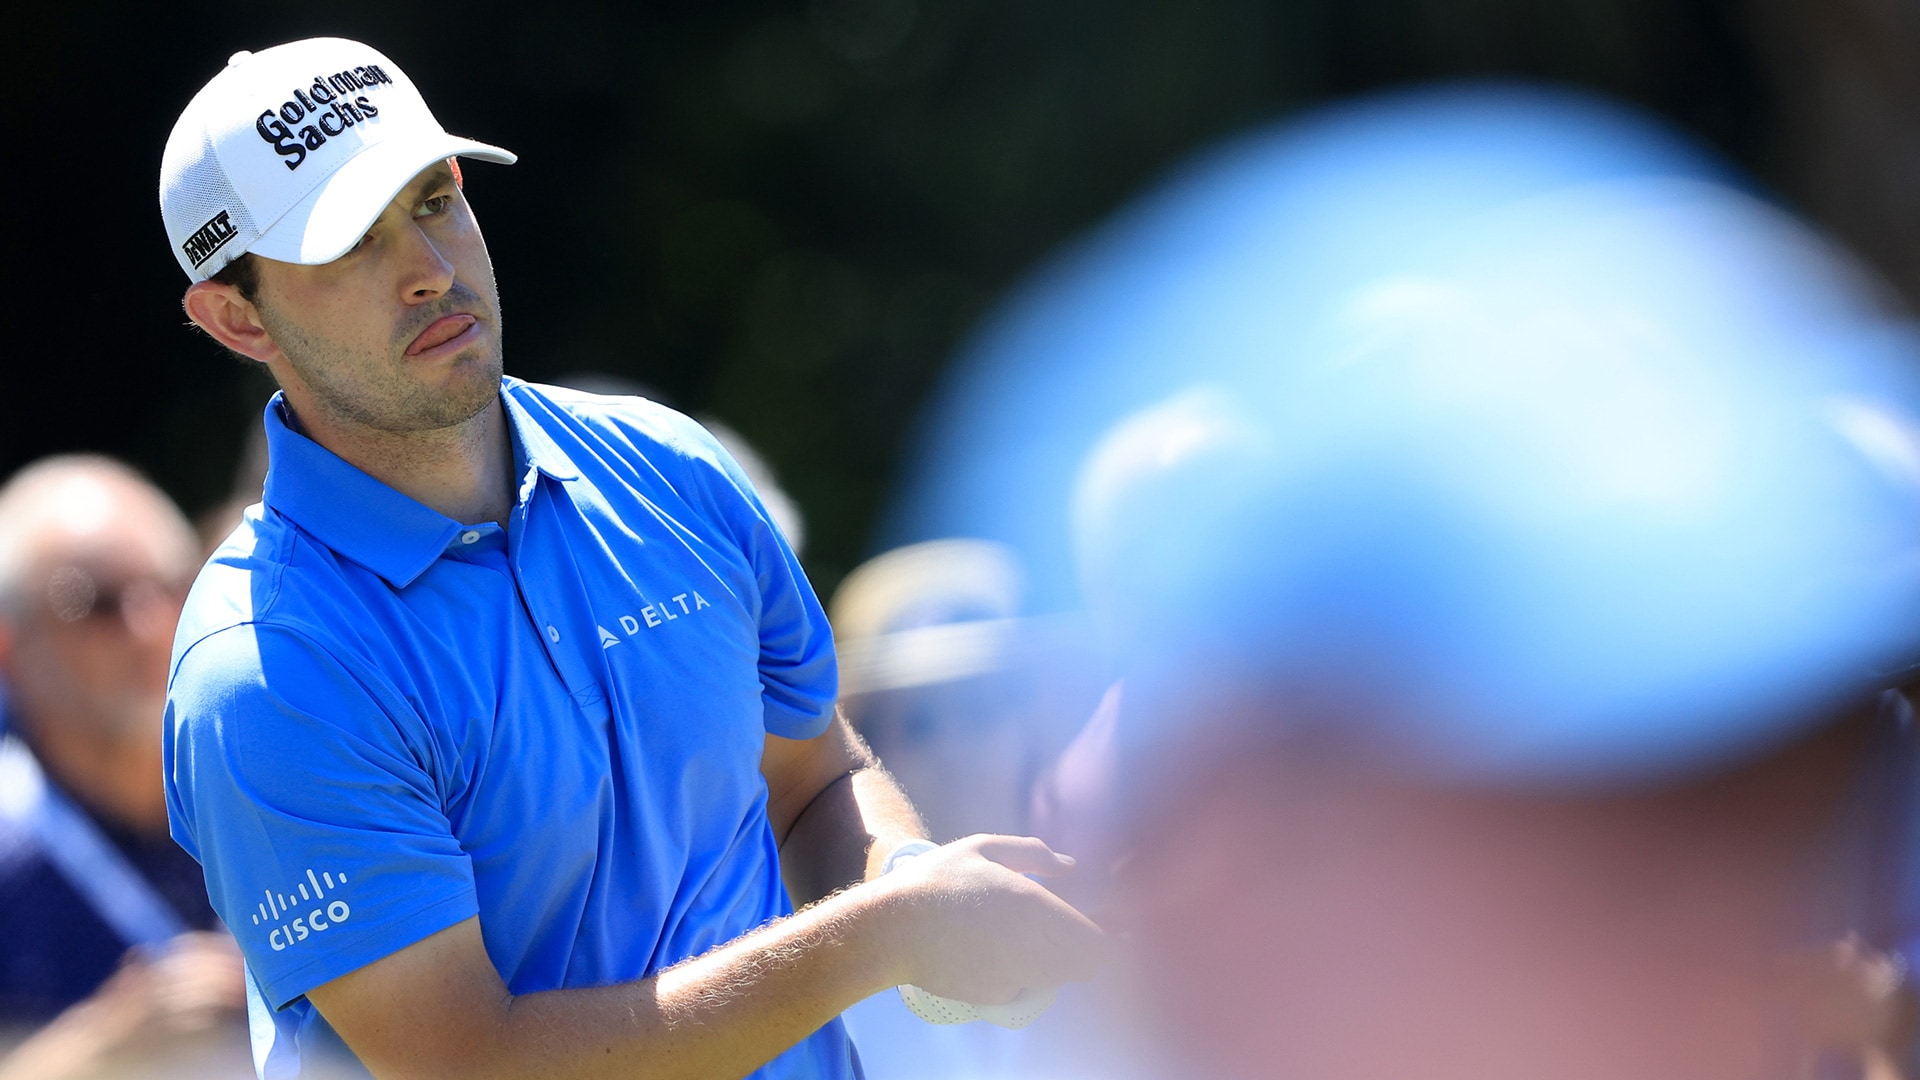 After playoff loss last year, Patrick Cantlay aces way back into Heritage contention